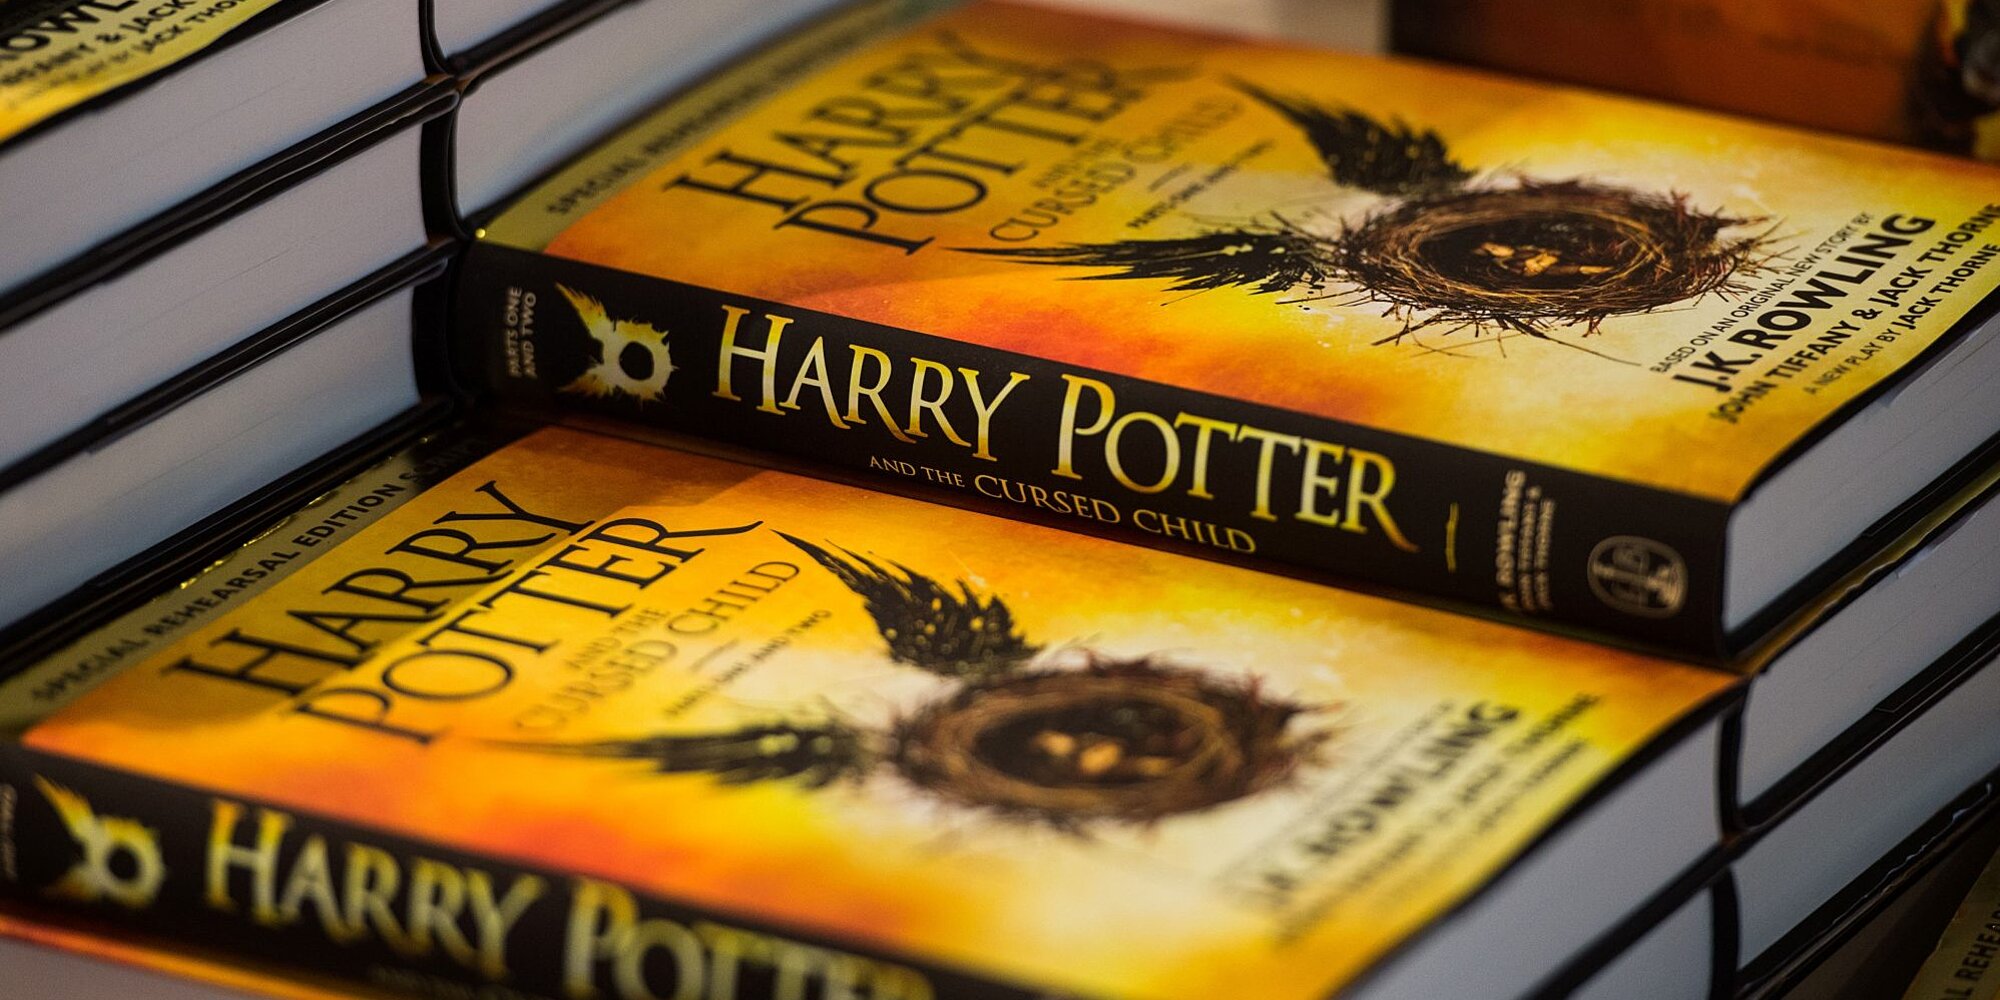 harry potter and the cursed child book edition